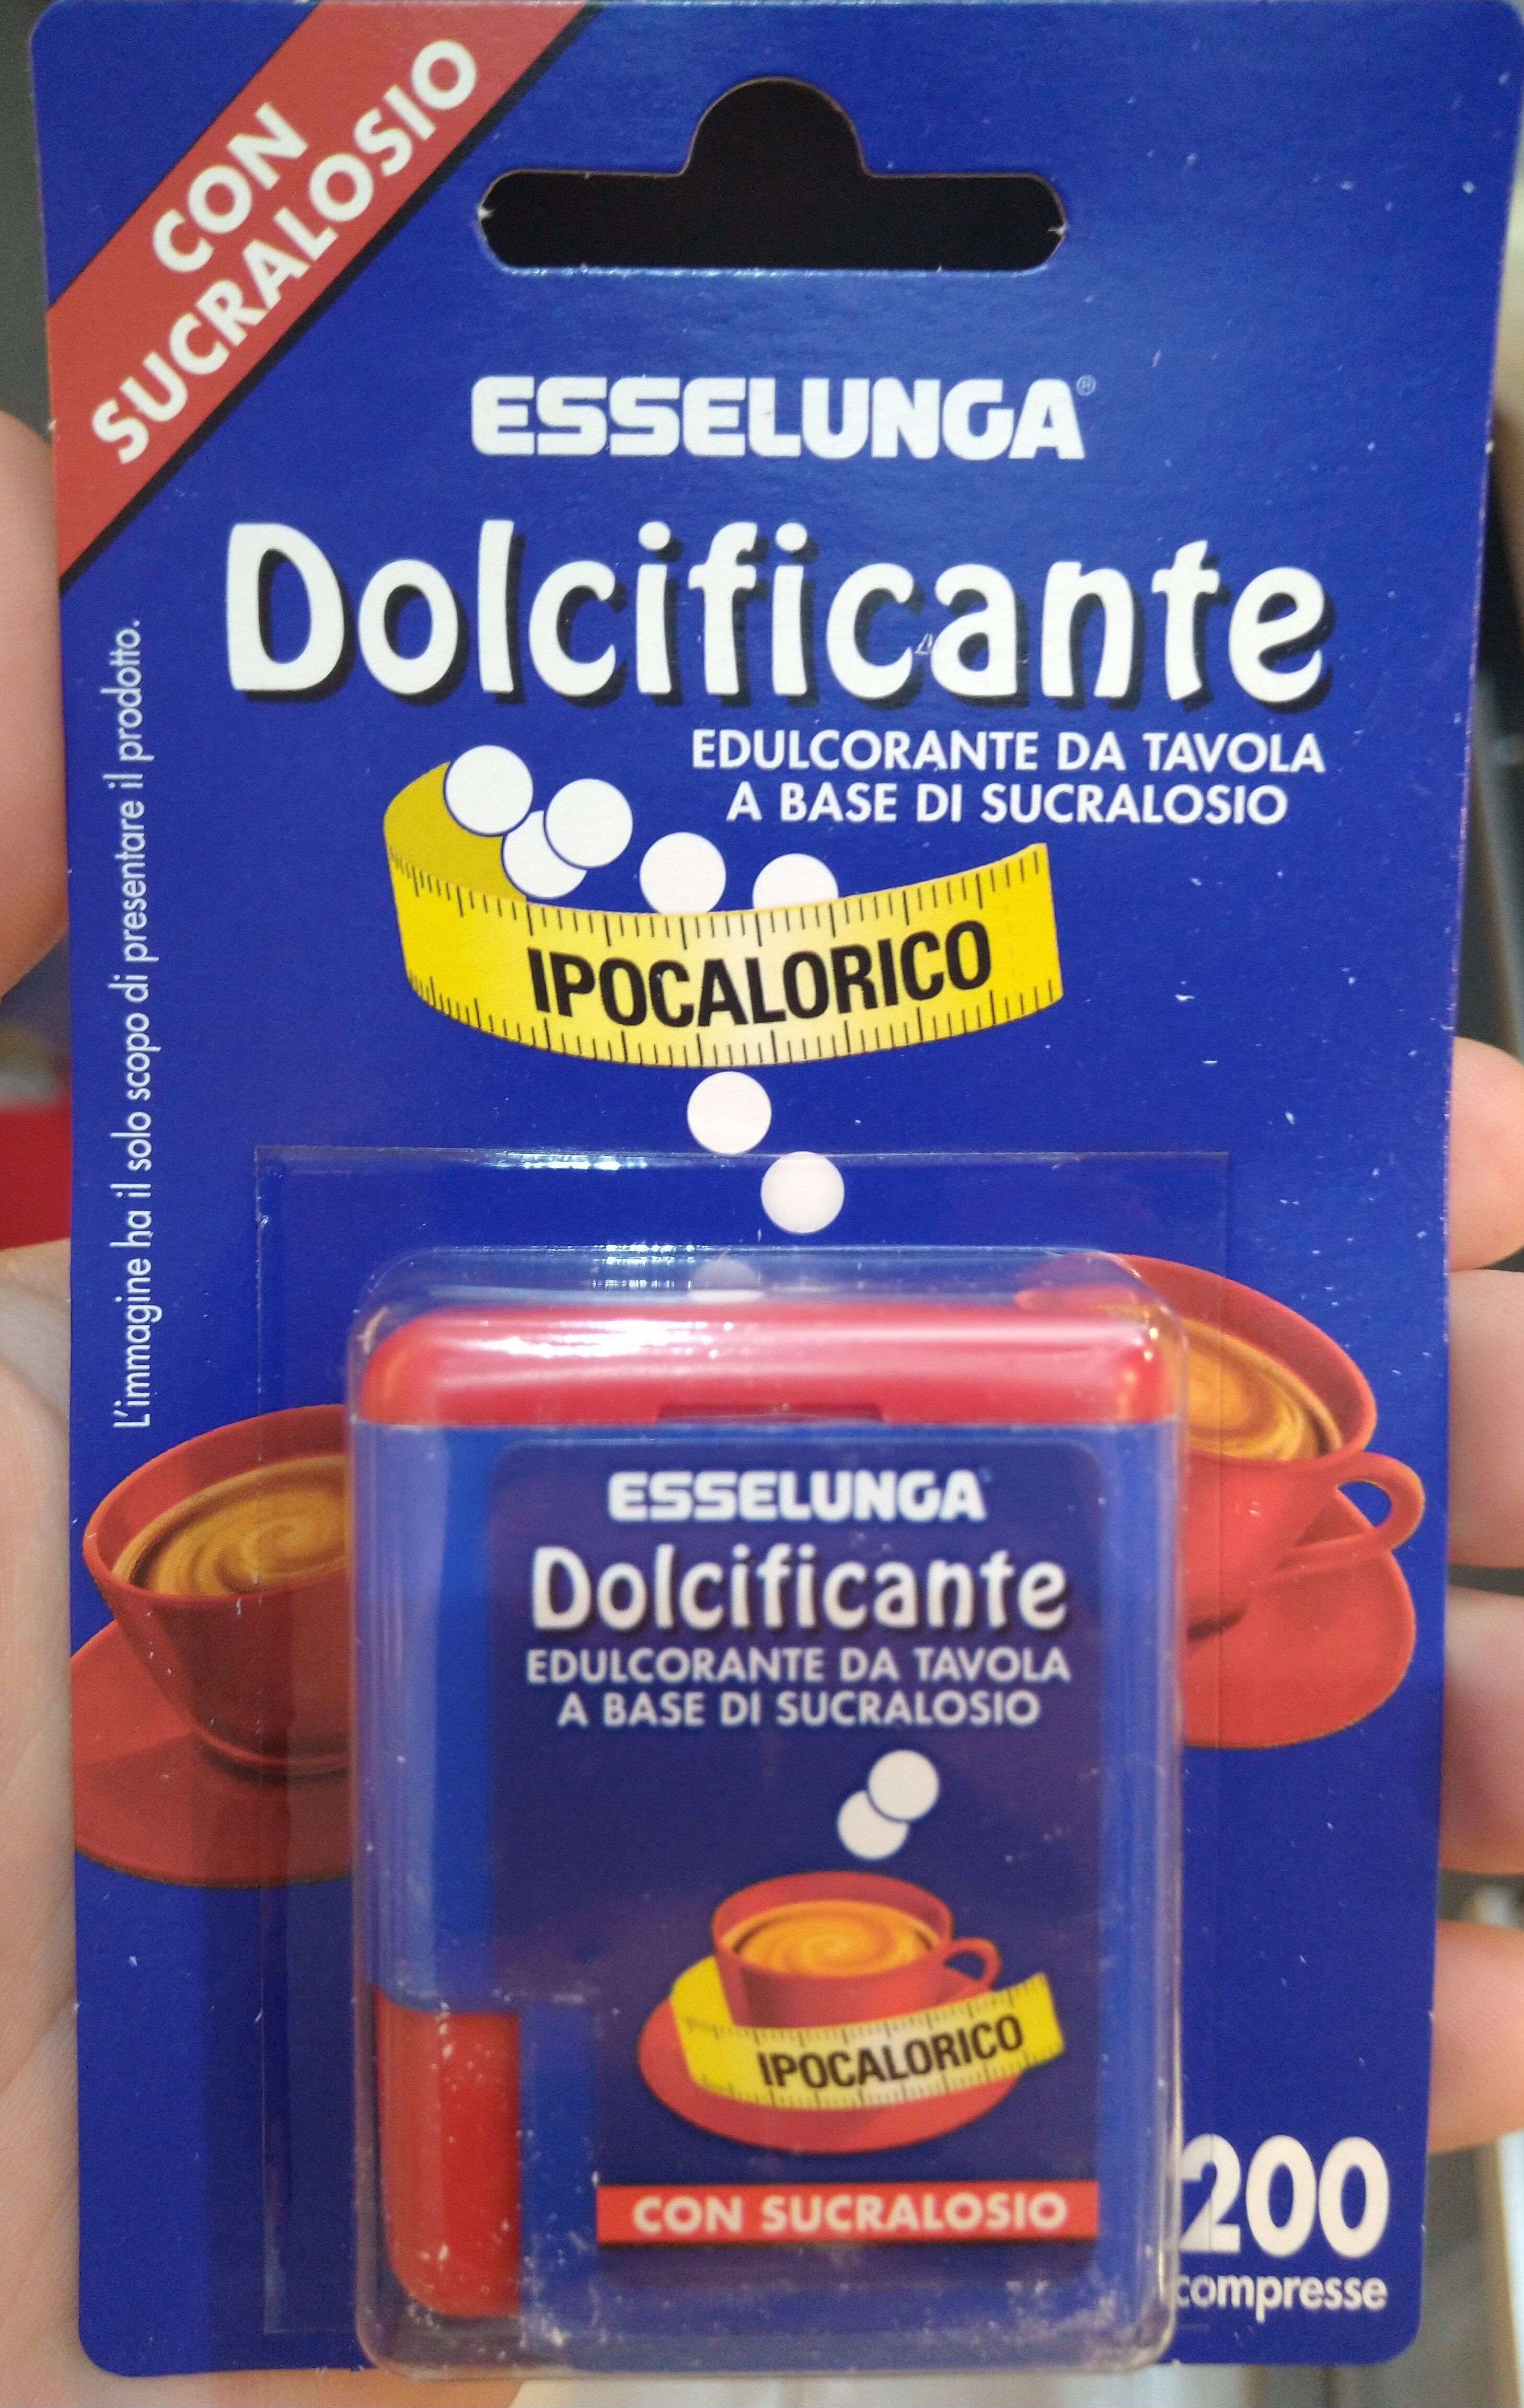 Dolcificante - Product - it